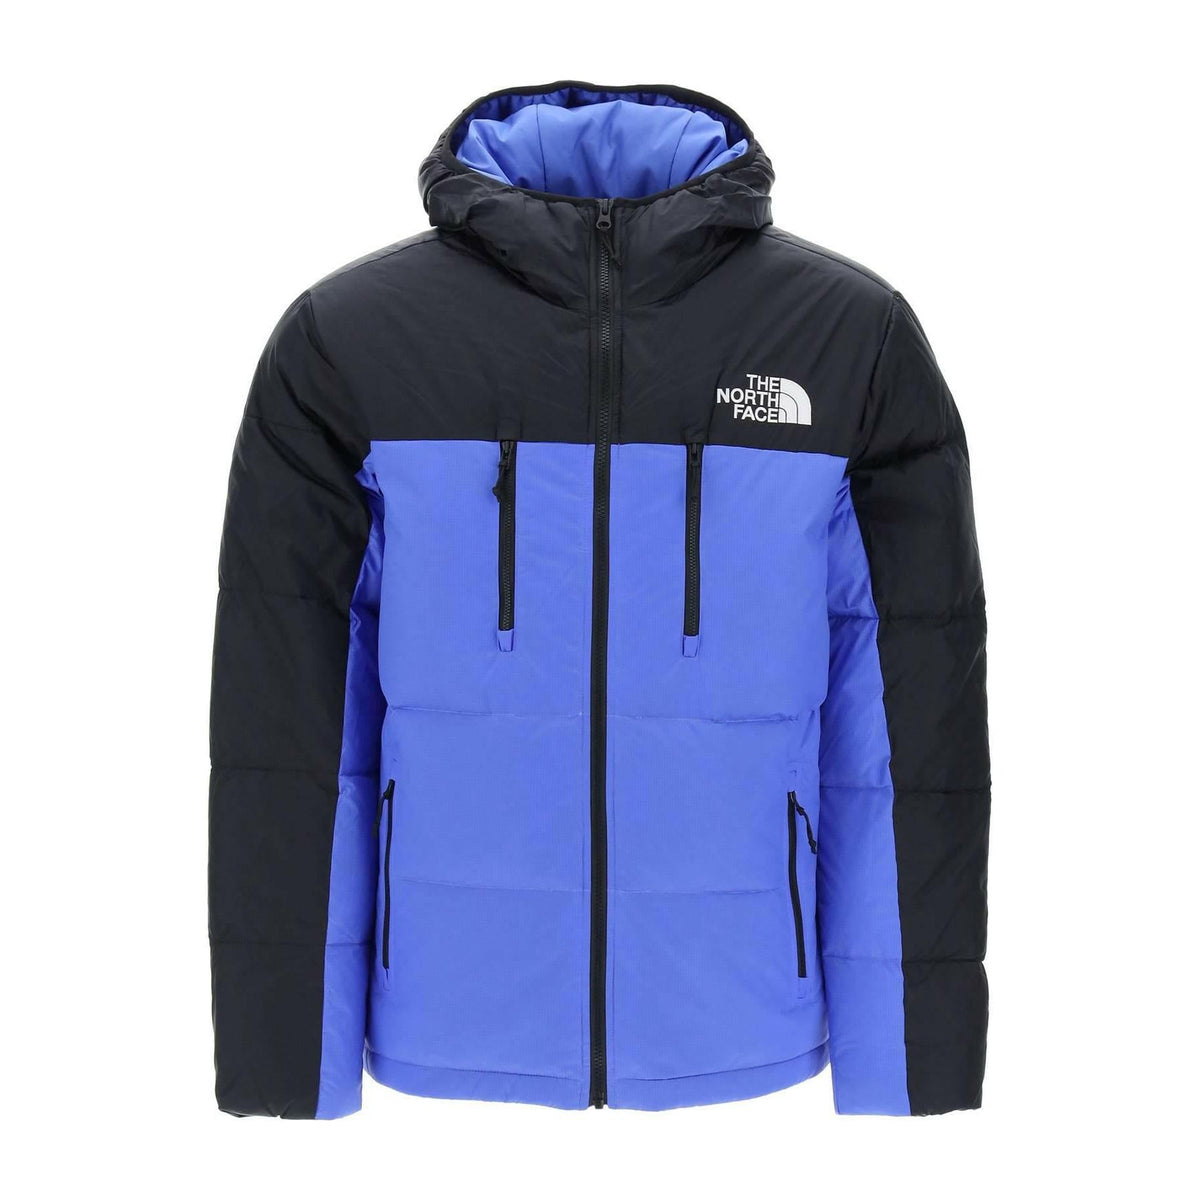 THE NORTH FACE - The North Face Solar Blue Recycled Nylon Himalayan Short Hooded Down Jacket - JOHN JULIA